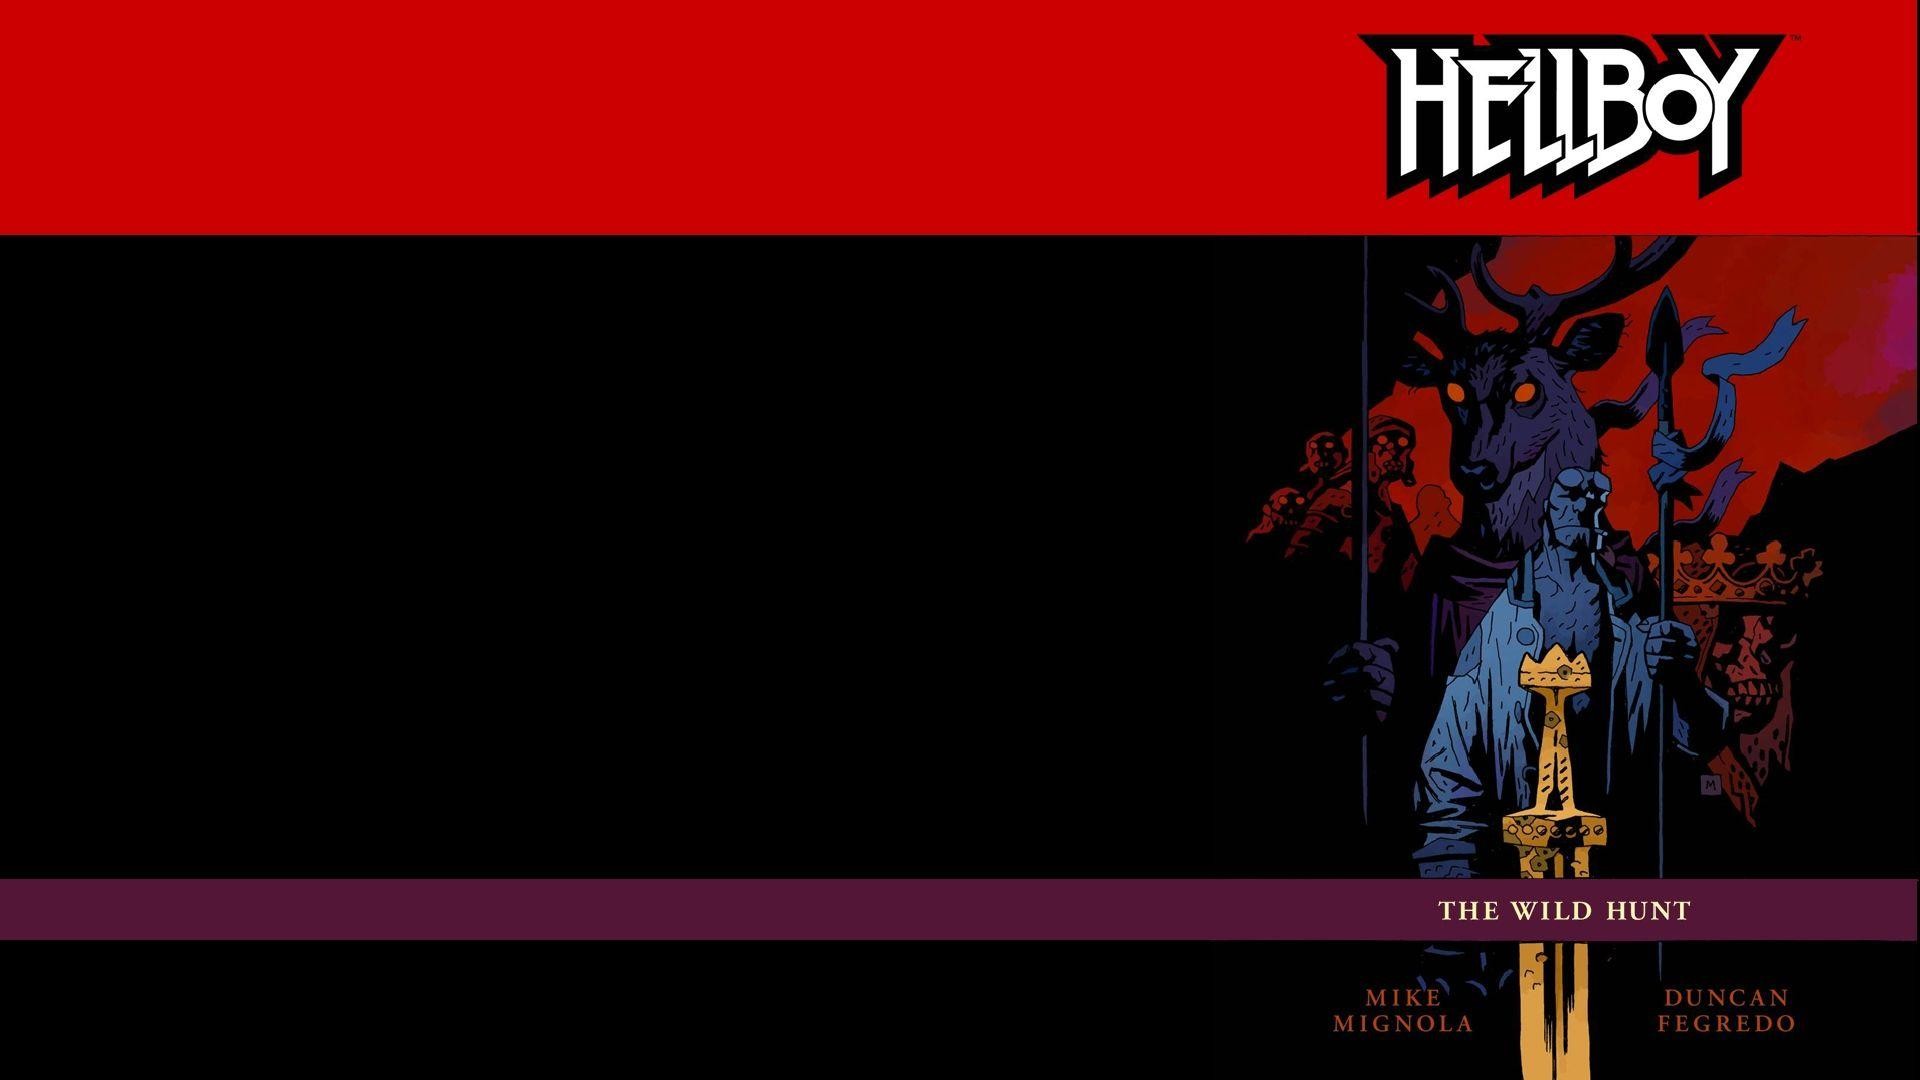 1920x1080 84 Hellboy Wallpapers | Hellboy Backgrounds